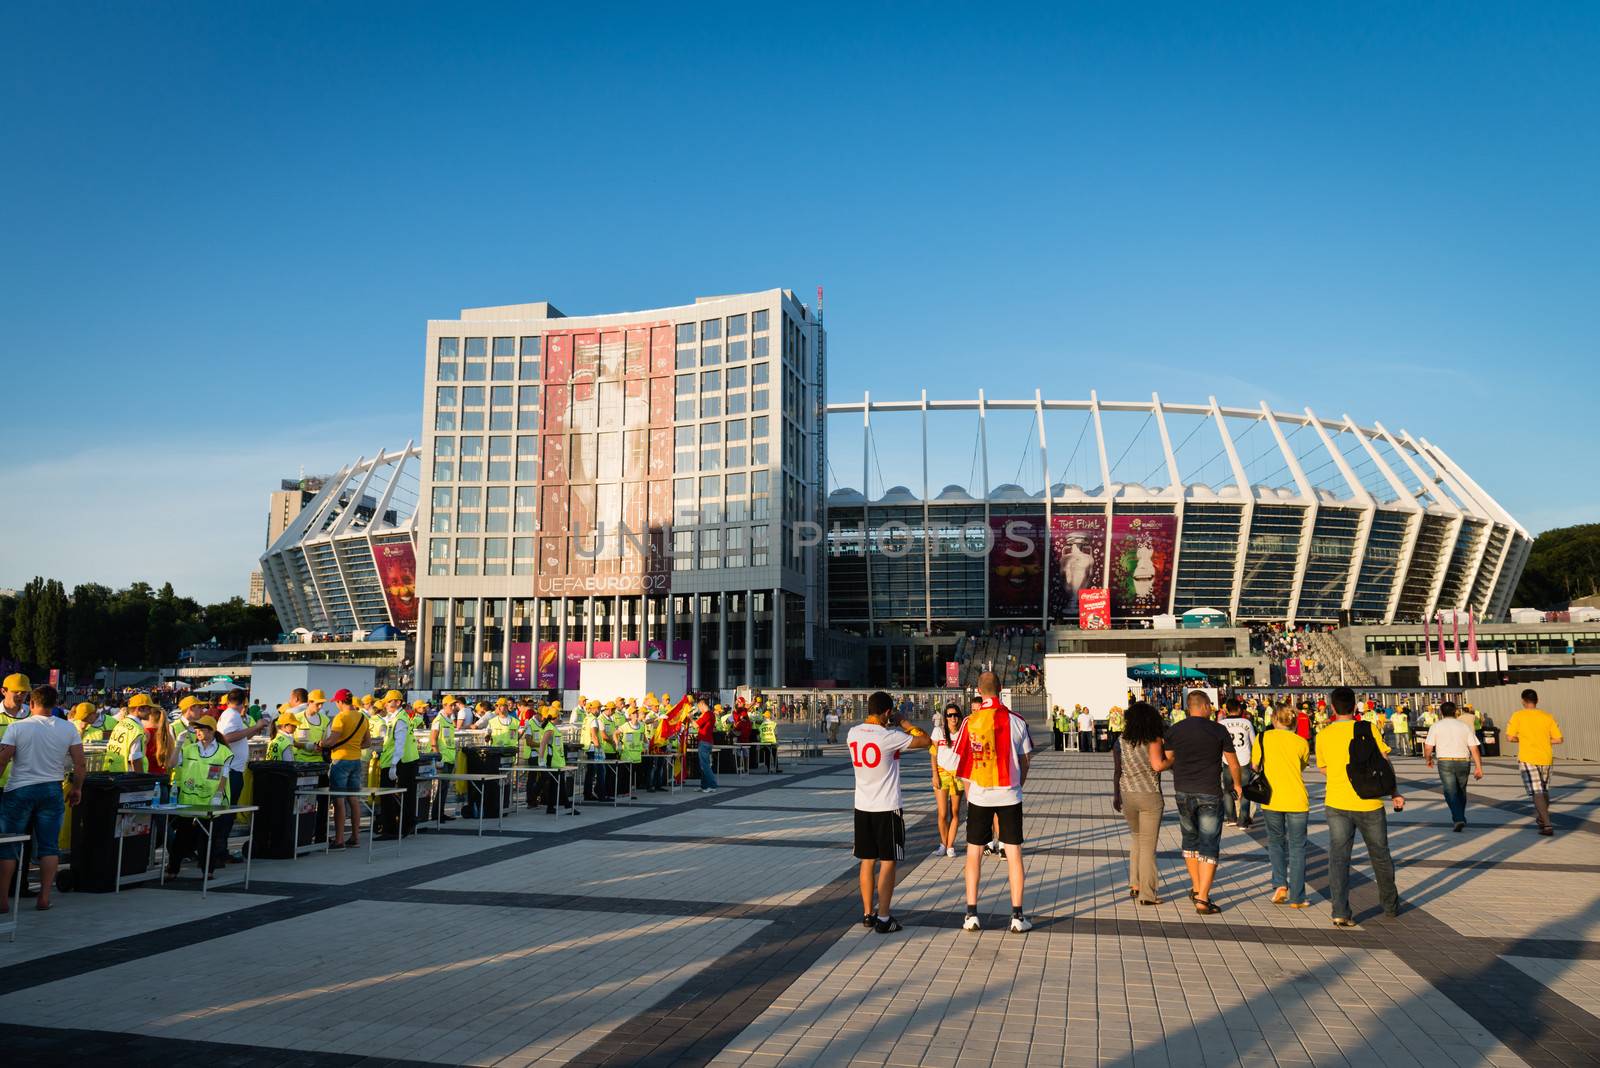 KIEV, UKRAINE - JUL 1: Olympic stadium entrance with security check points before EURO 2012 final match Spain vs. Italy on July 1, 2012 in Kiev, Ukraine